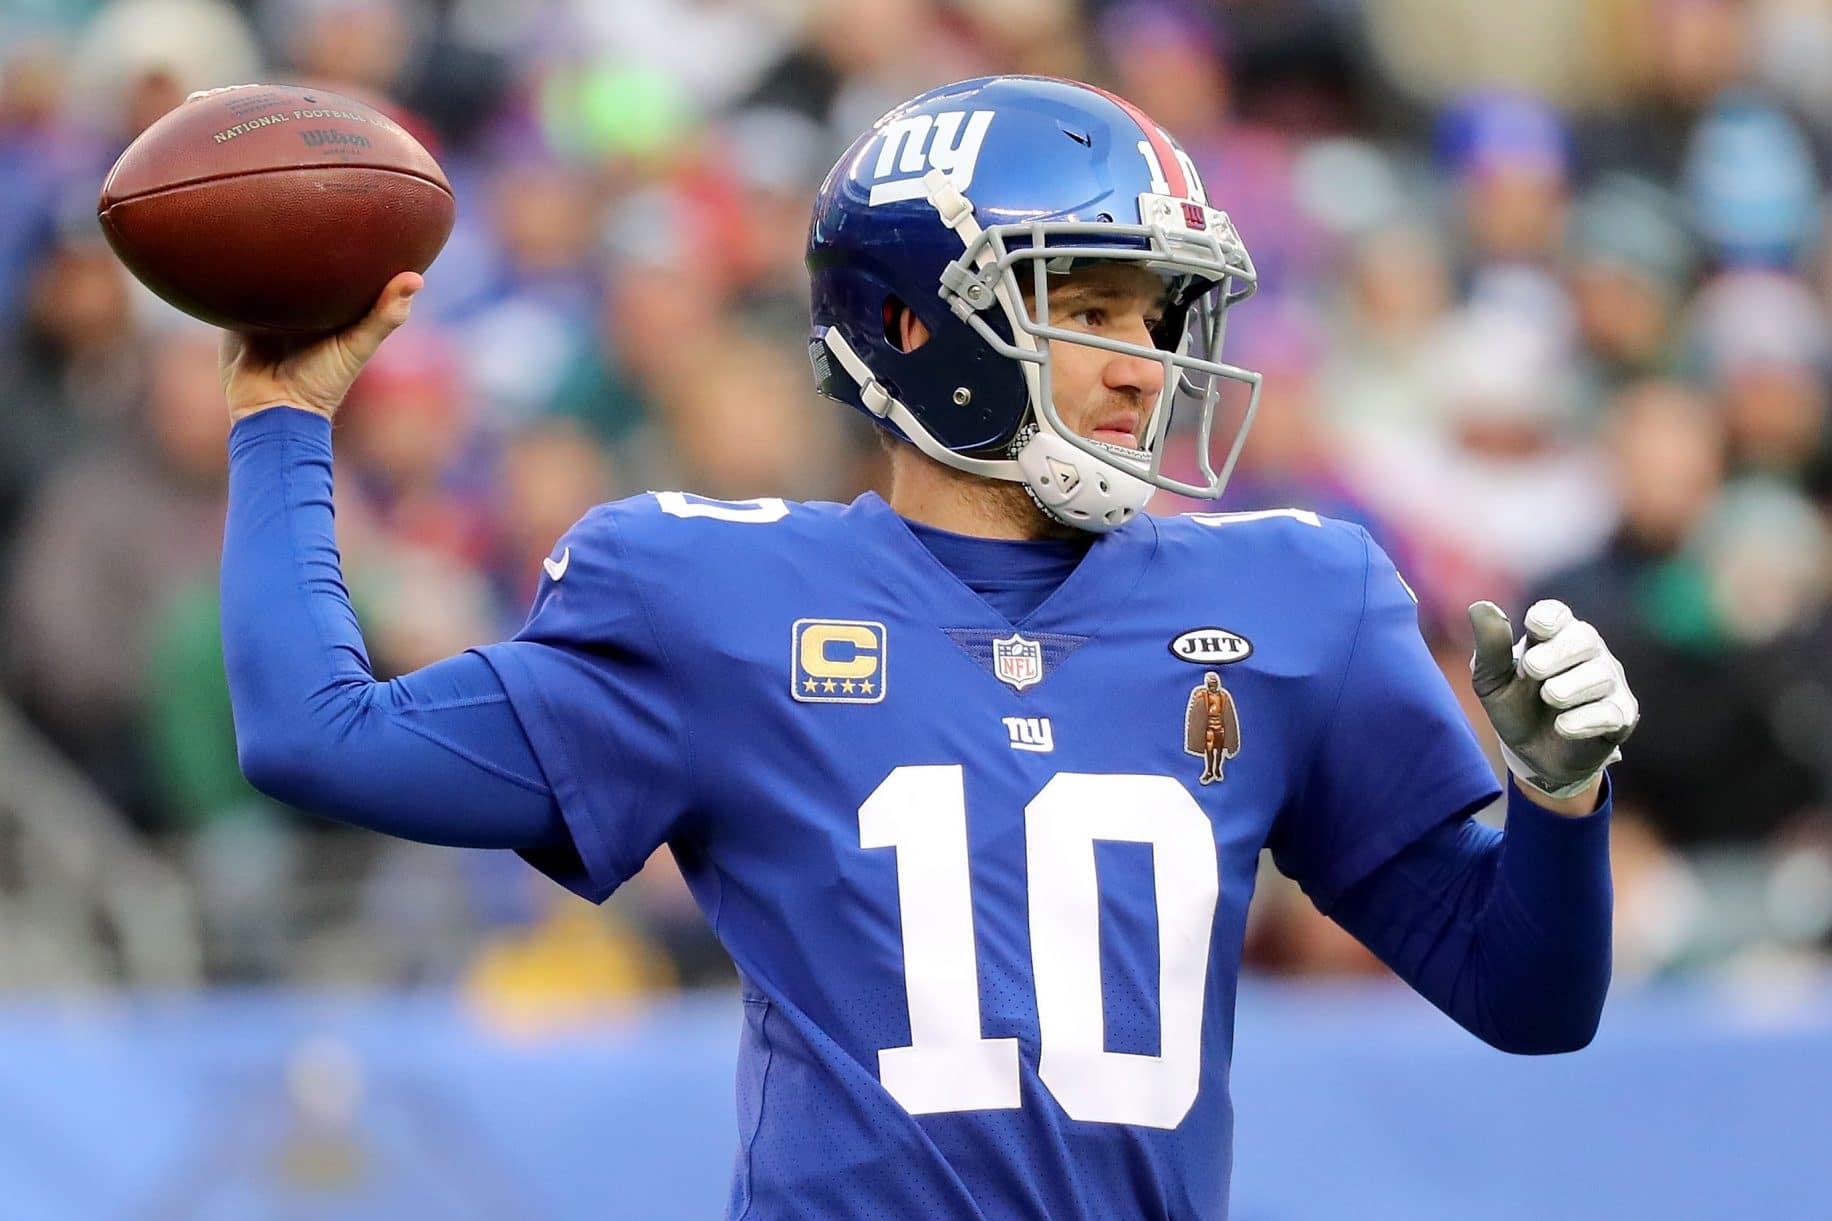 New York Giants: Eli Manning tries to explain what a catch actually is